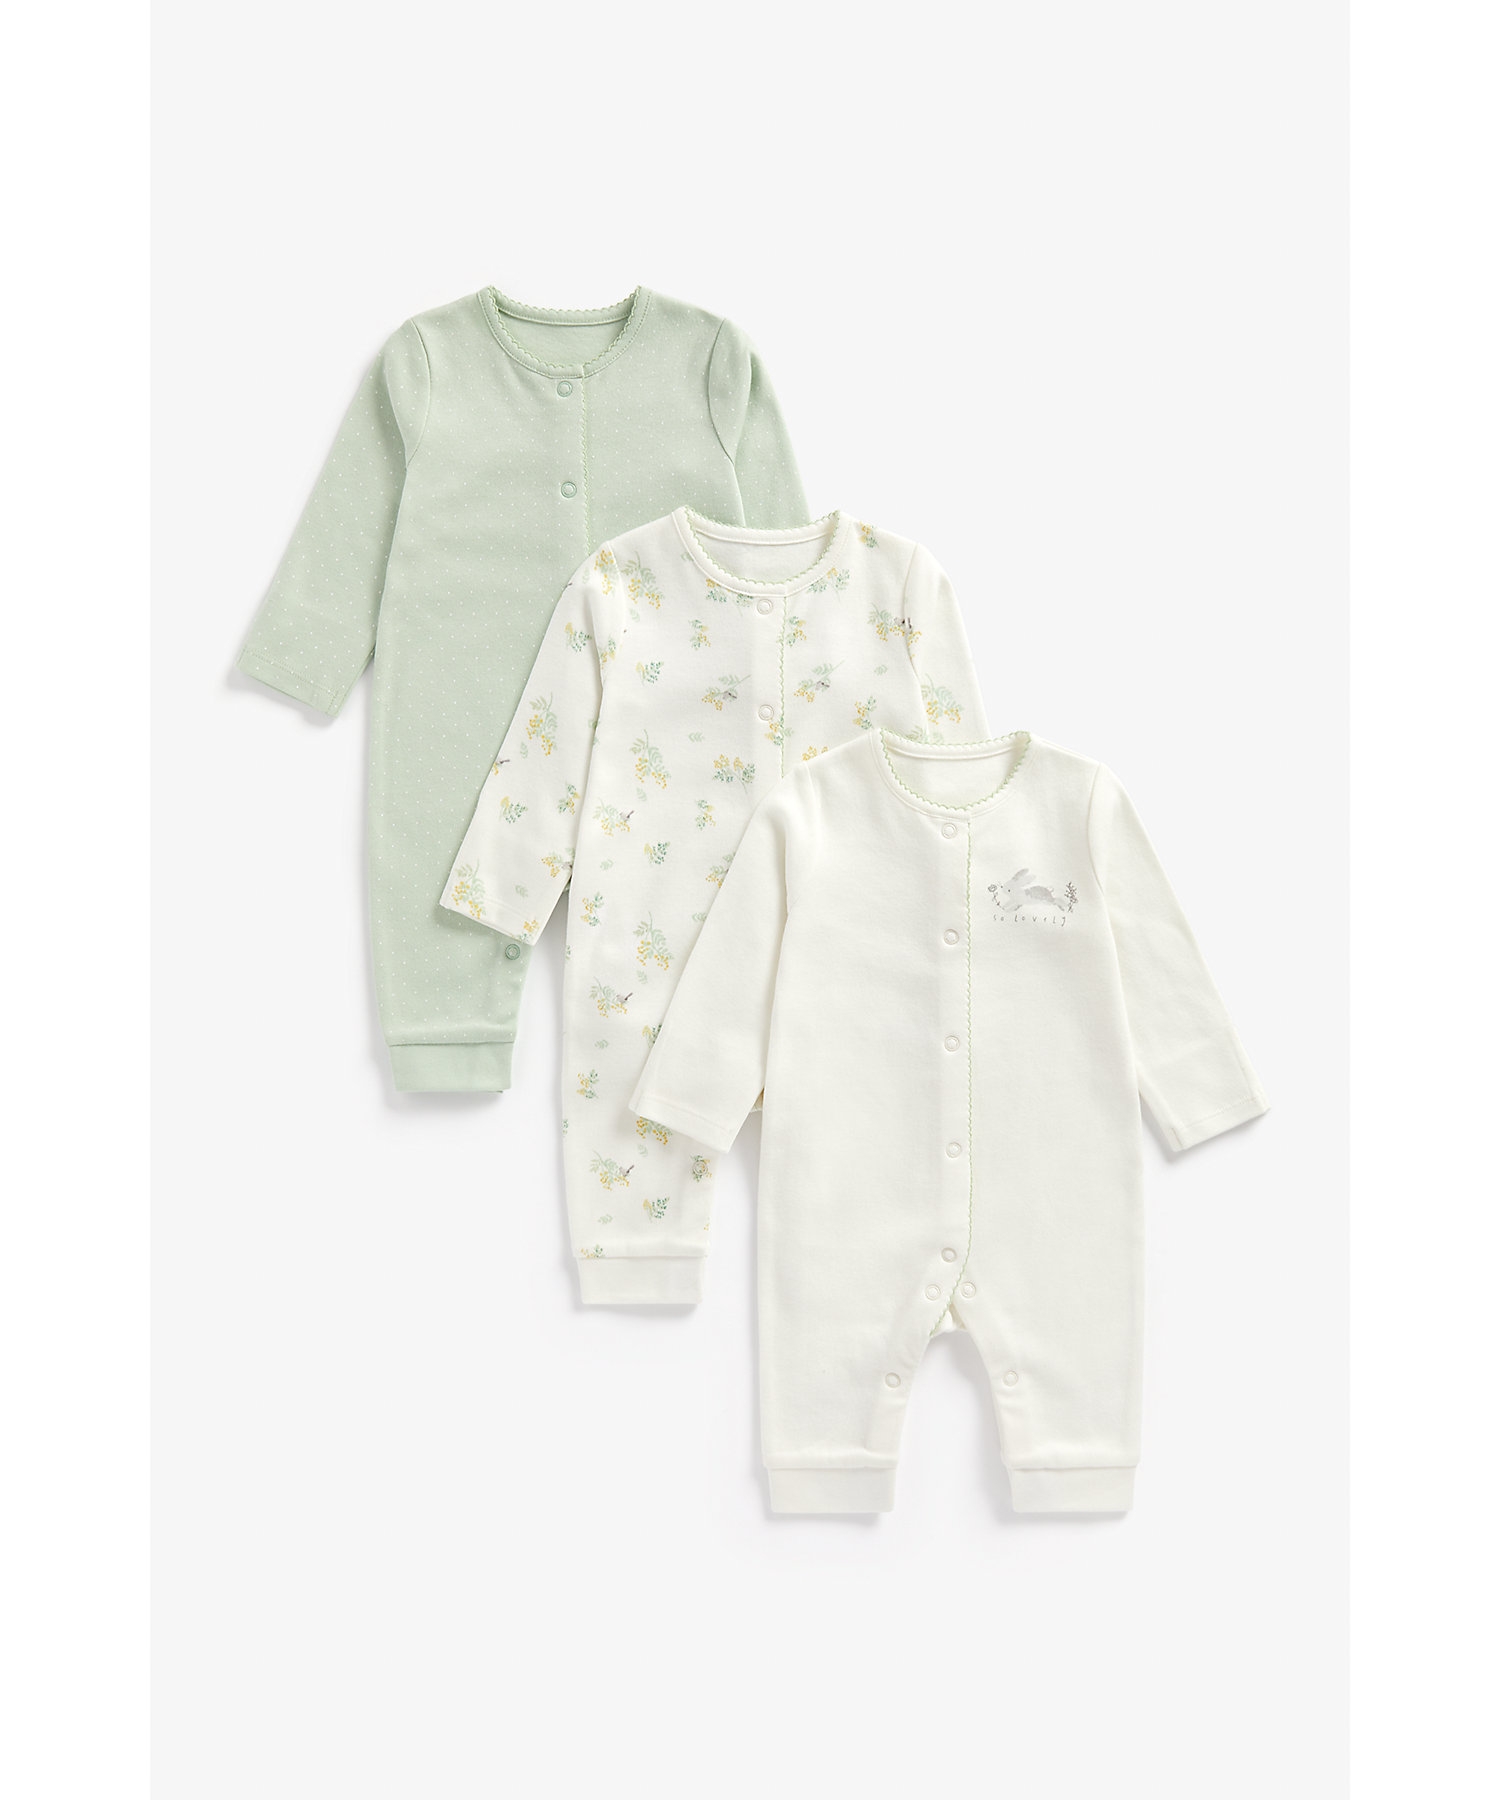 Mothercare | Girls Full Sleeves Sleepsuits - Pack of 3 - Multicolor 0